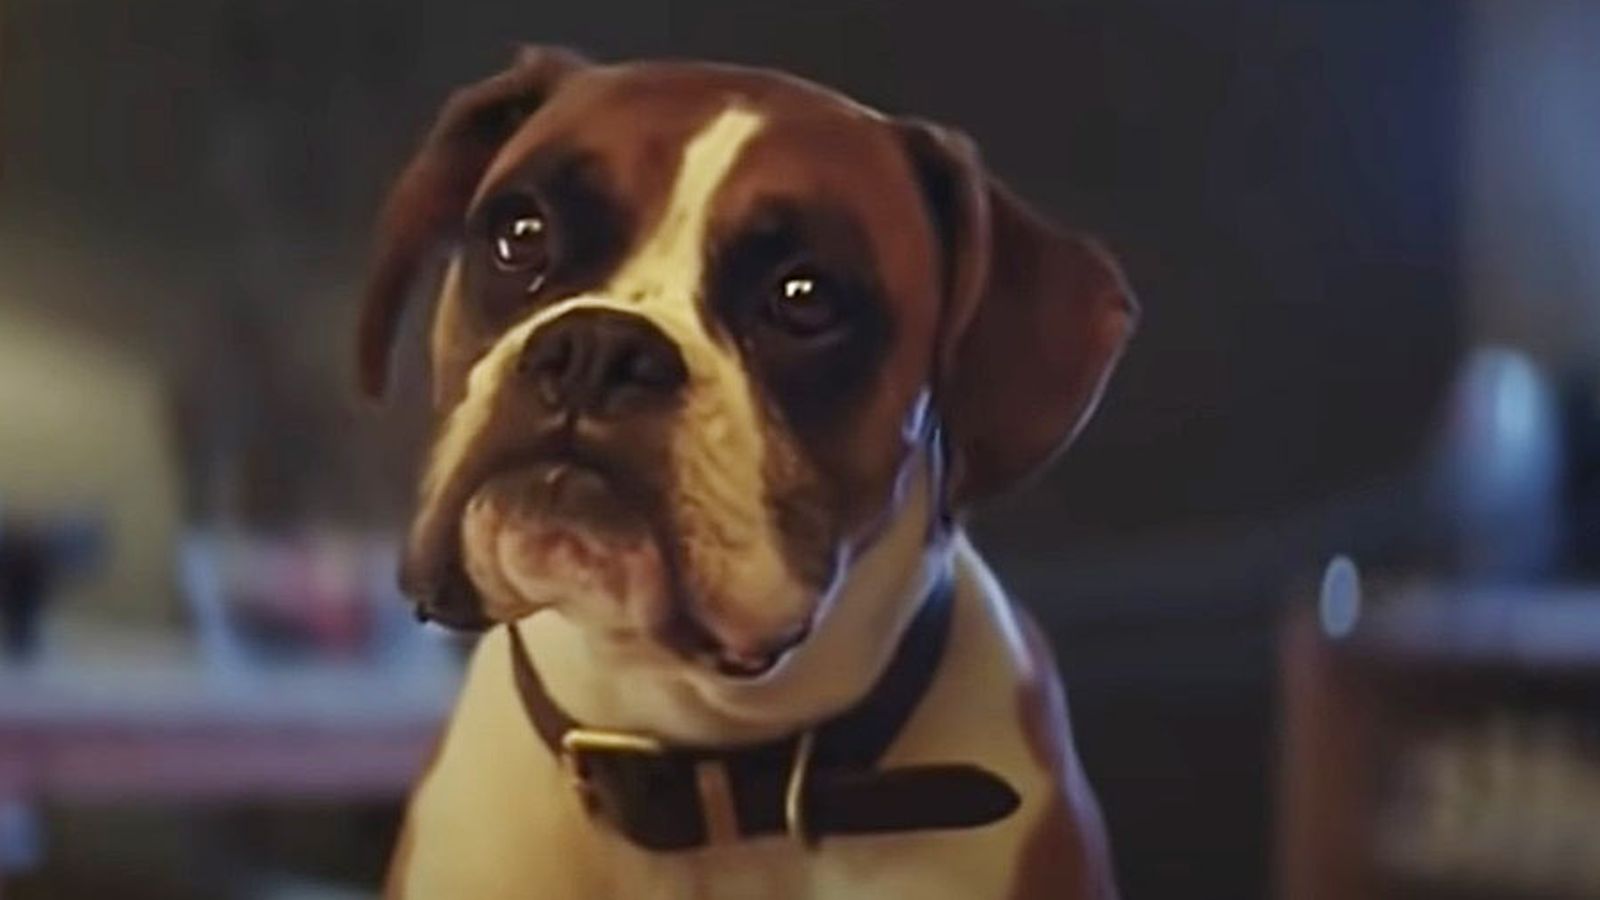 Buster the trampolining dog from John Lewis Christmas advert has died